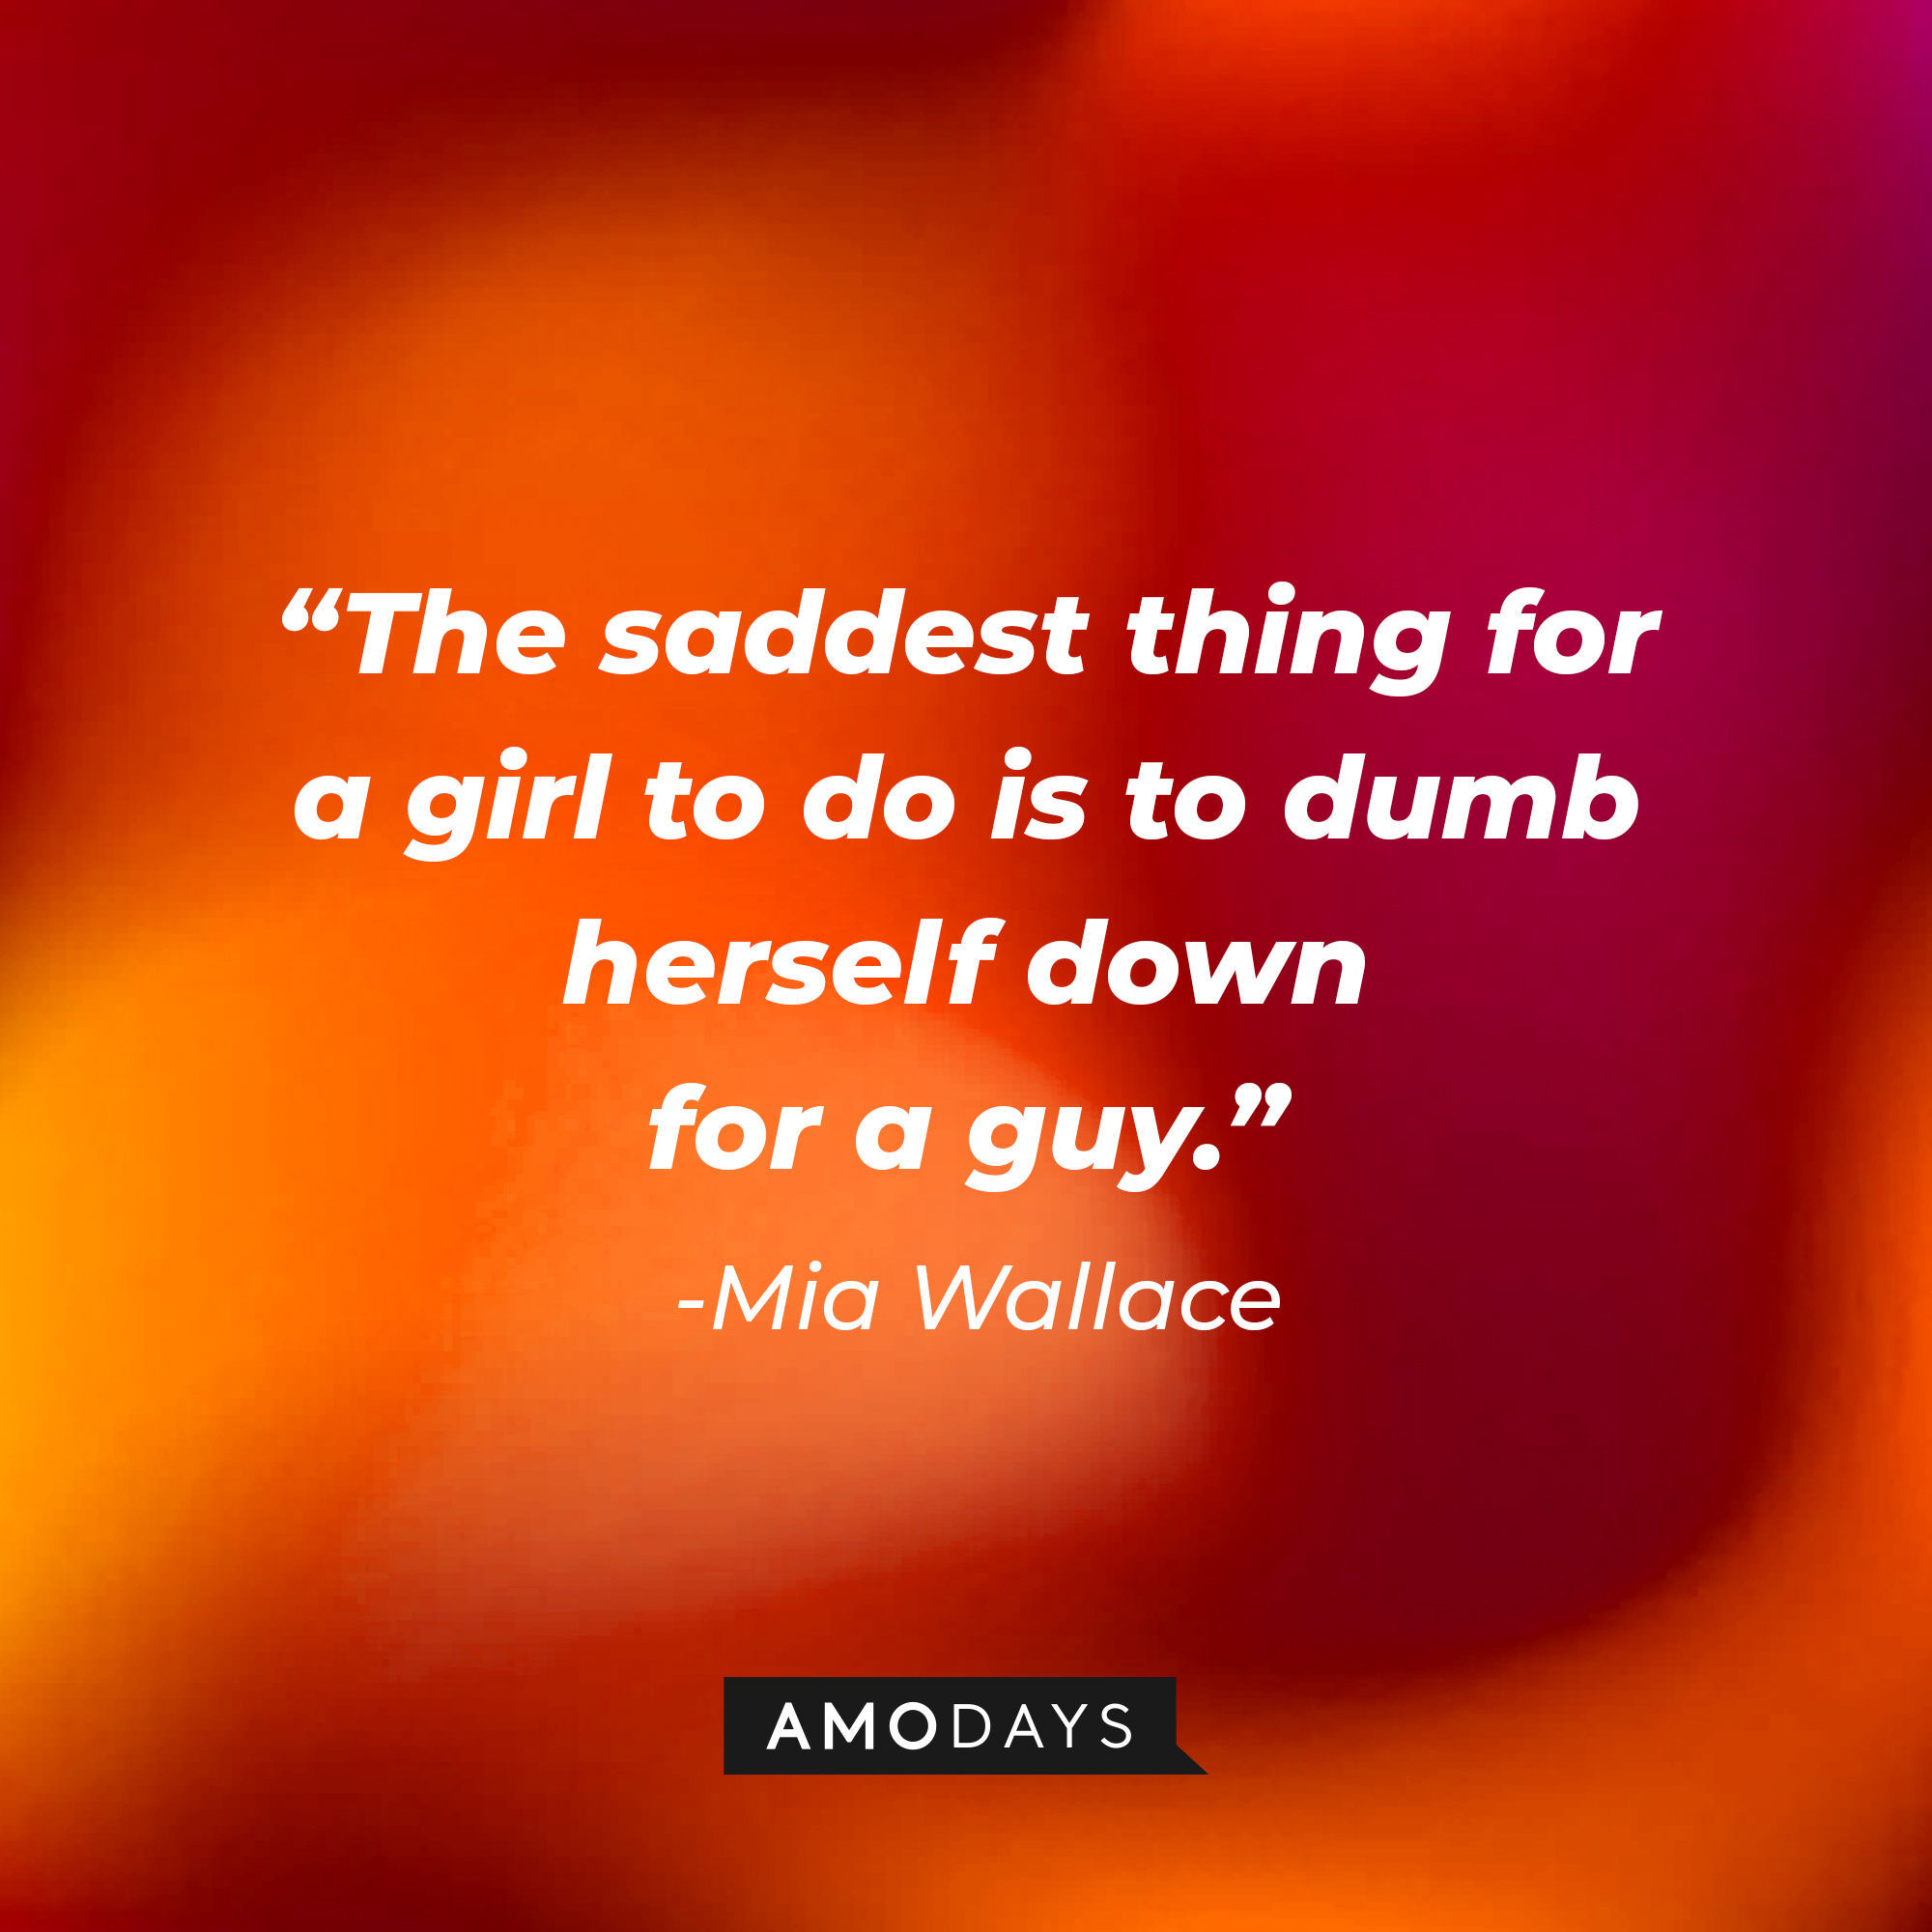 Mia Wallace’s quote: “The saddest thing for a girl to do is to dumb herself down for a guy.” | Source: AmoDays